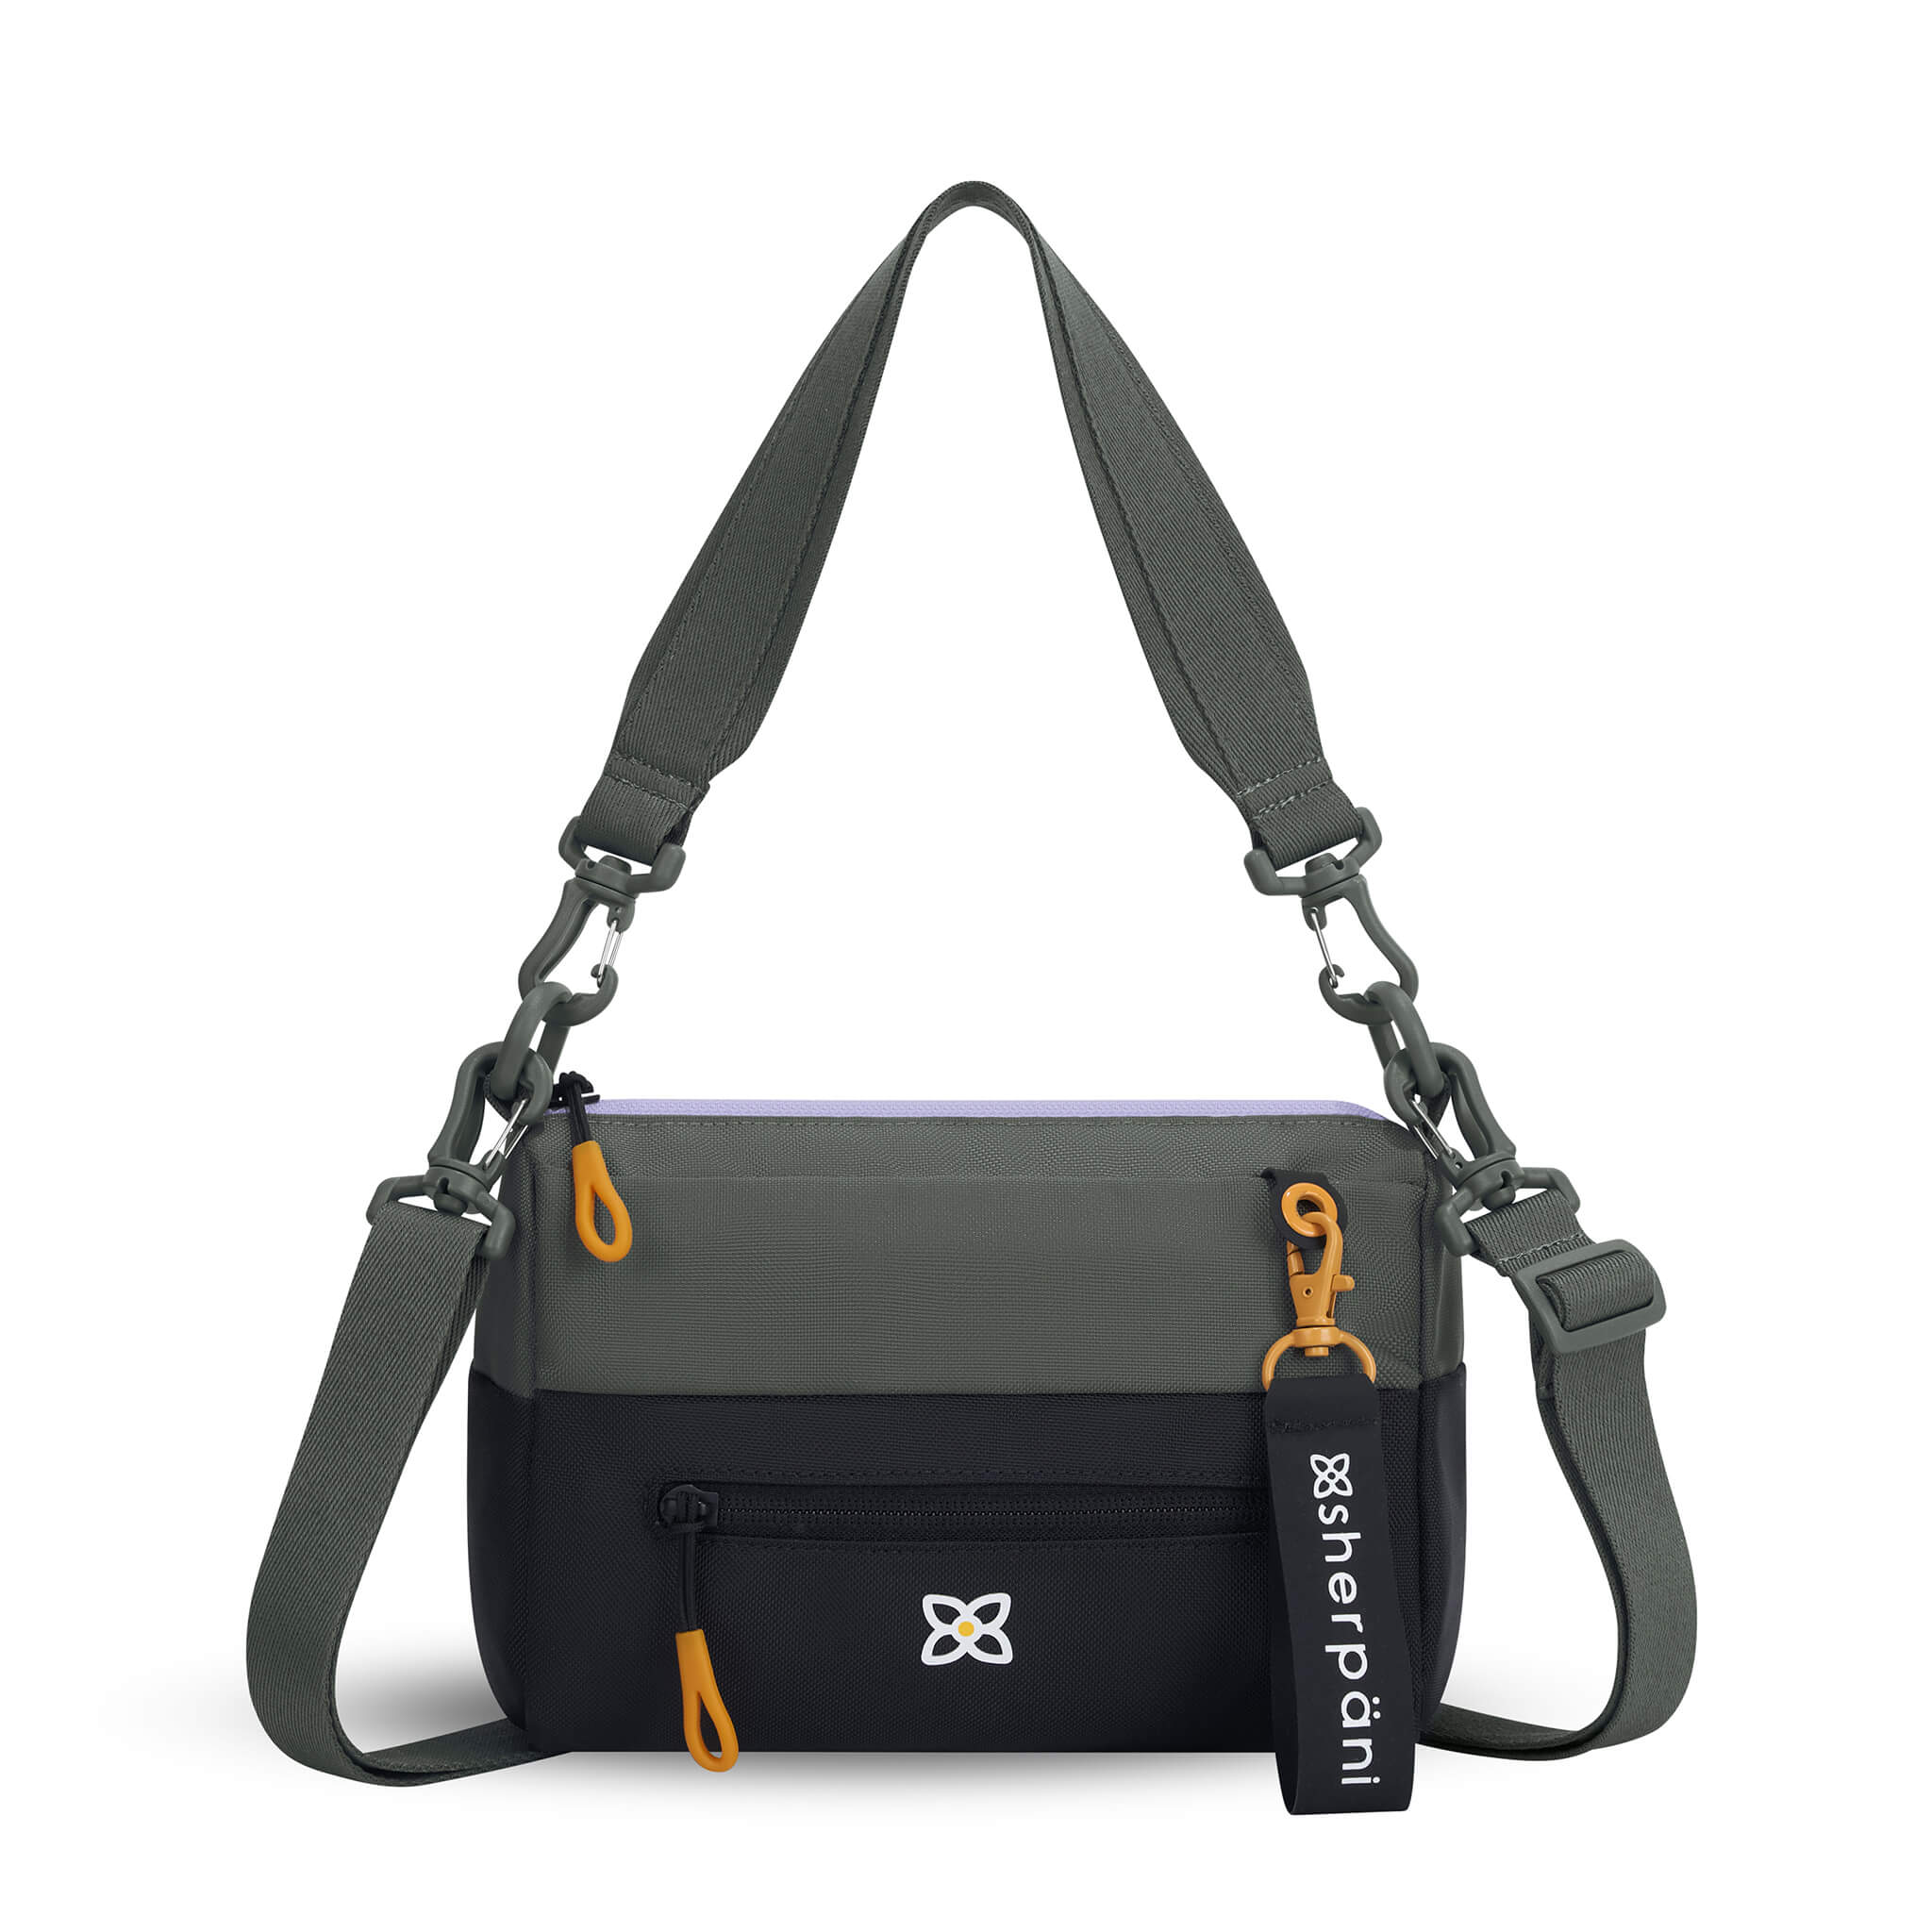 Flat front view of Sherpani mini shoulder bag, the Skye in Juniper. Skye features include RFID security, detachable keychain, outside zipper pocket, two inside zipper pockets and two removable straps: a short shoulder strap and a longer adjustable crossbody strap. The Juniper color is two-toned in gray and black with yellow accents.